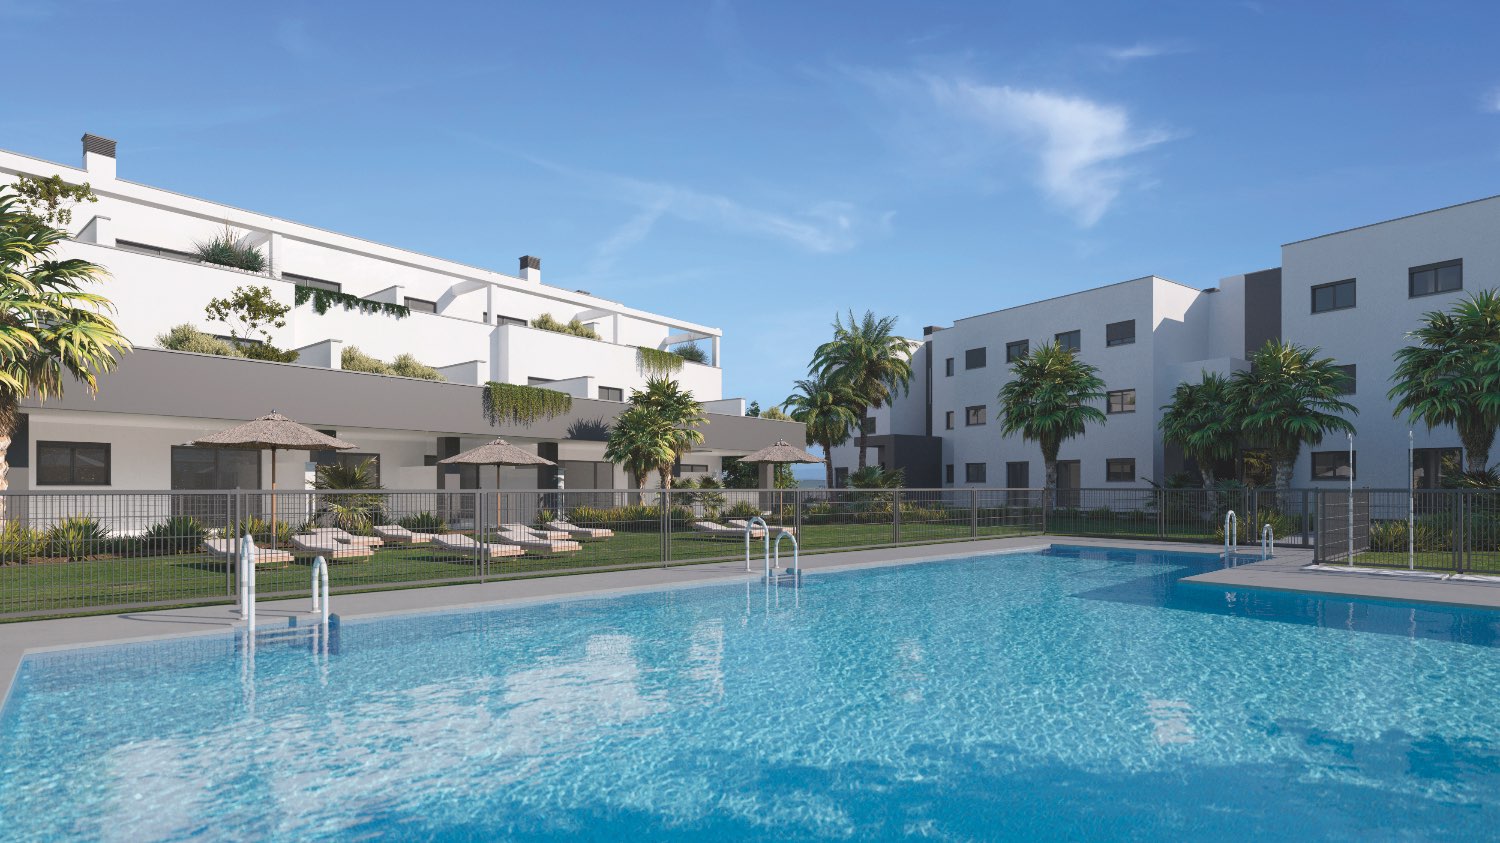 Two bedroom luxurious apartment in a new housing development in Estepona - Costa del Sol